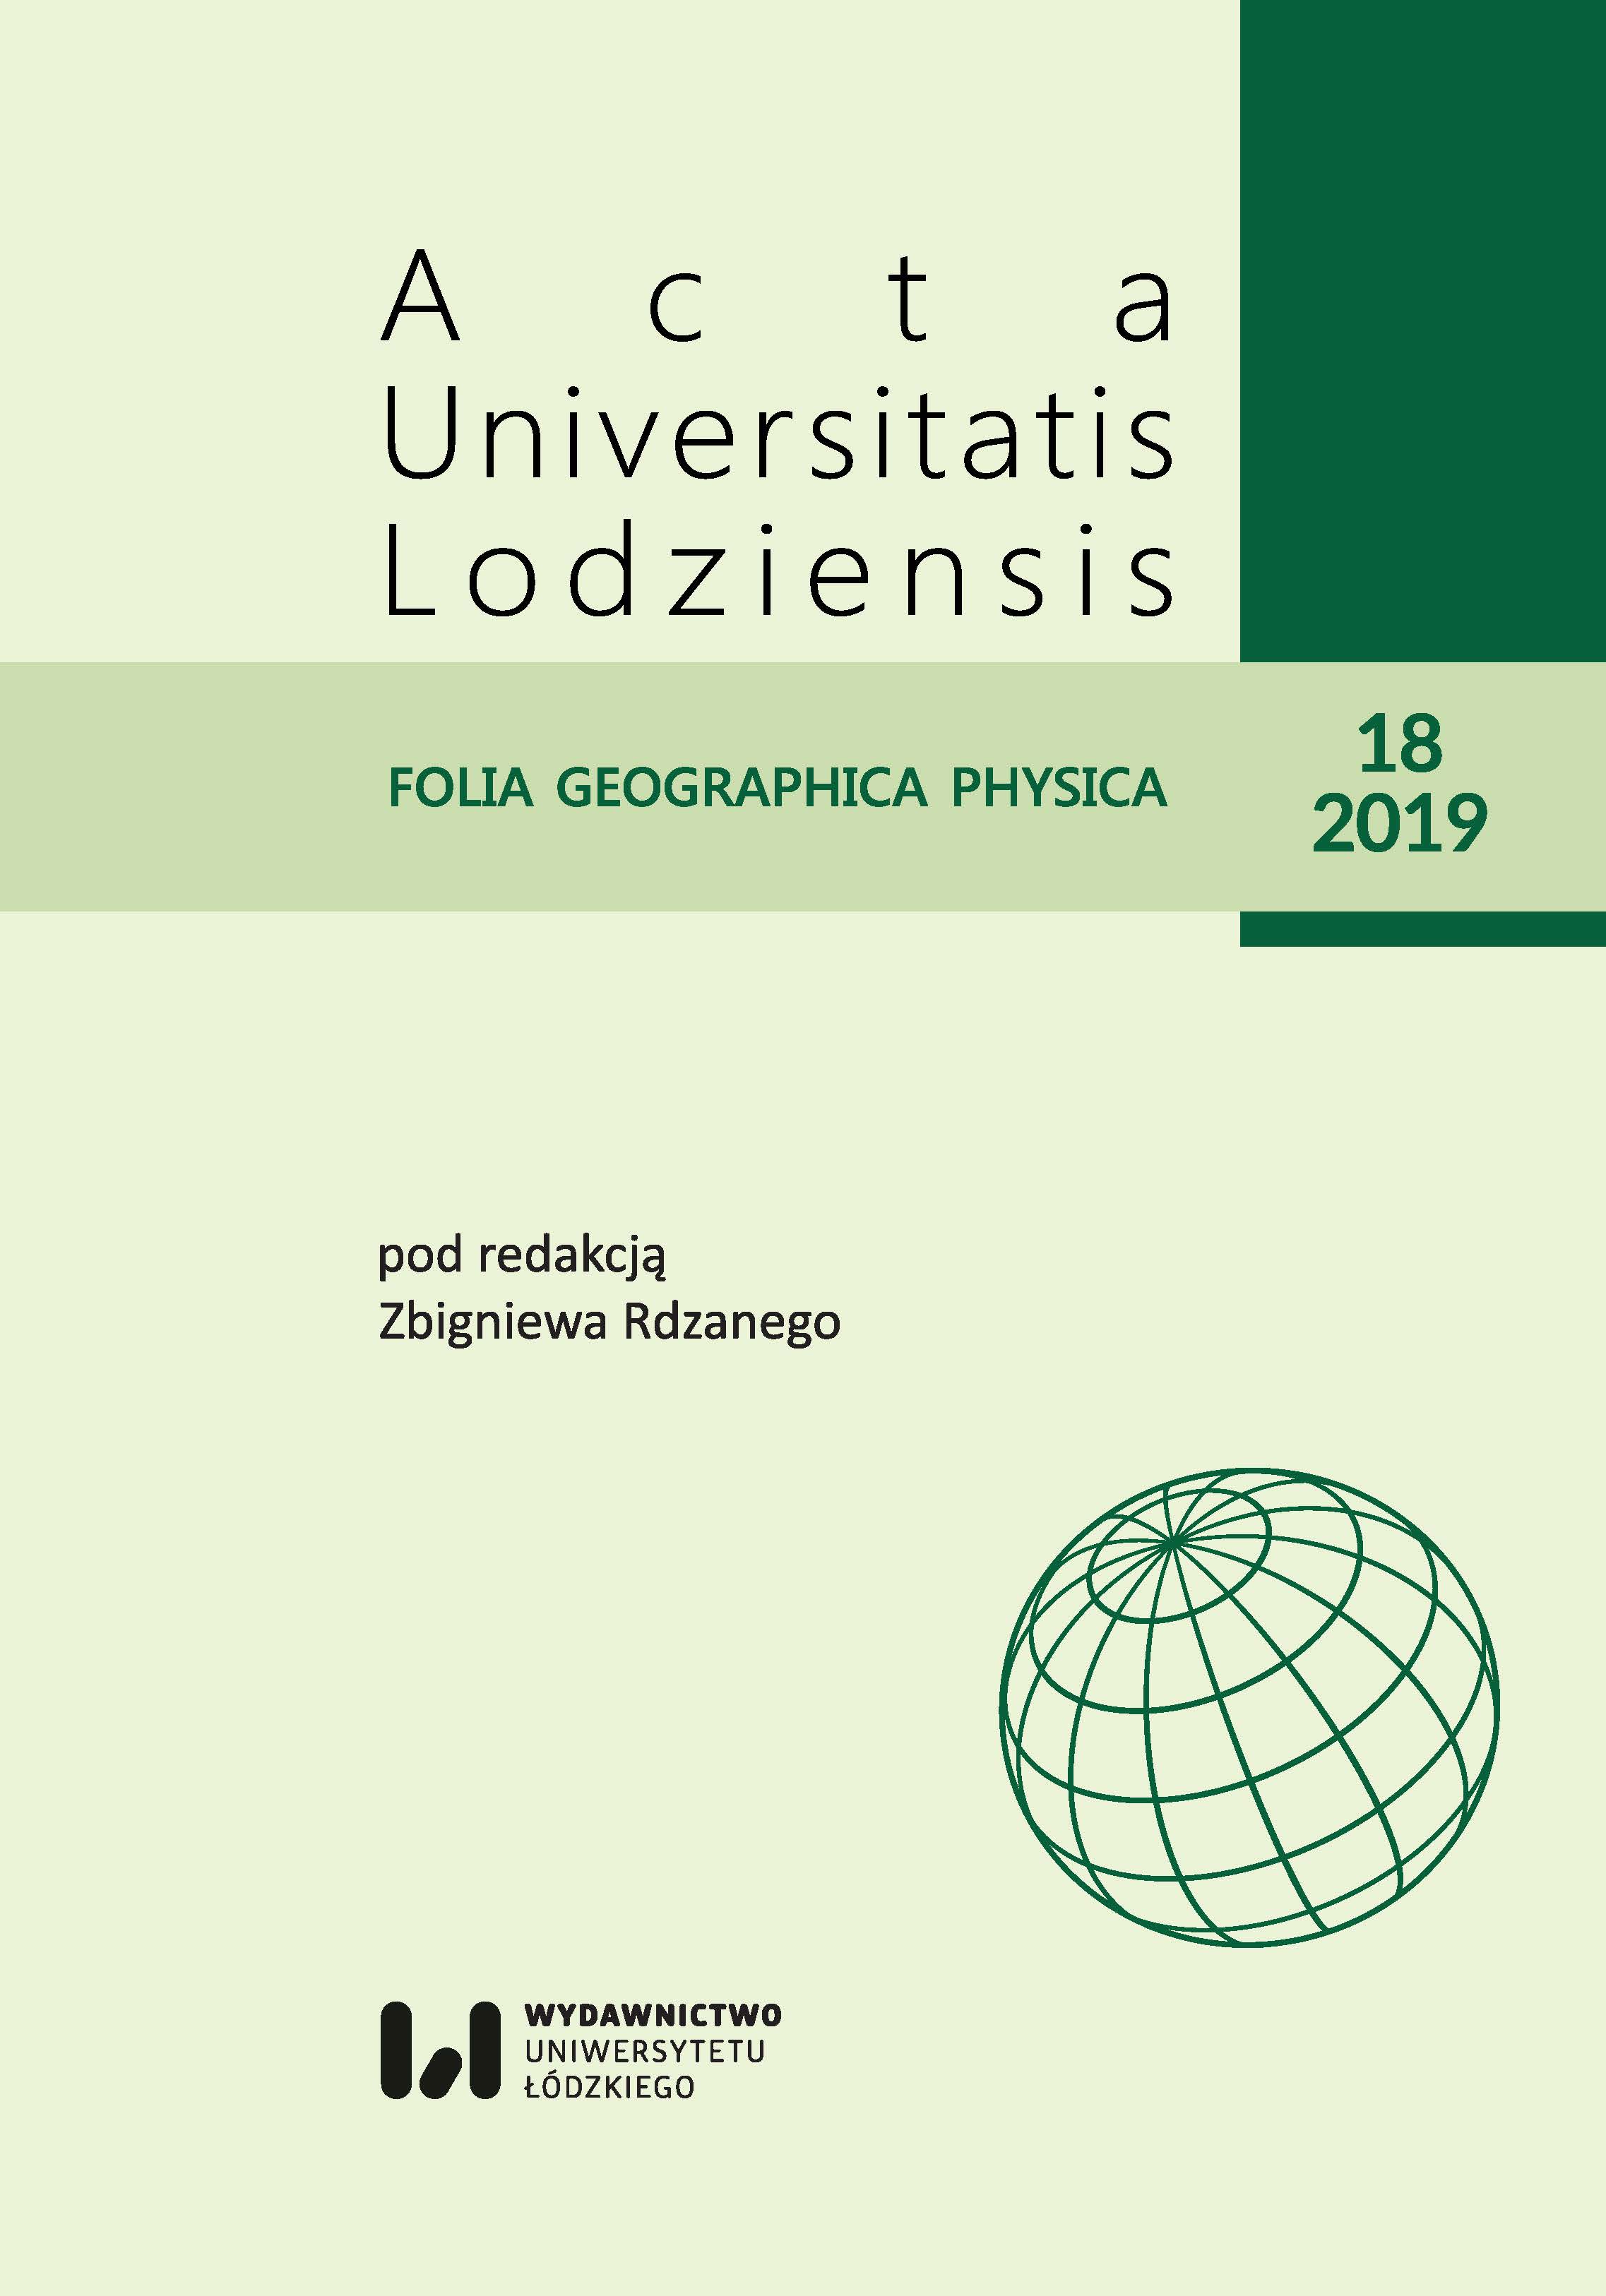 Papers published in the journal Acta Universitatis Lodziensis Folia Geographica Physica in the years 1997–2019